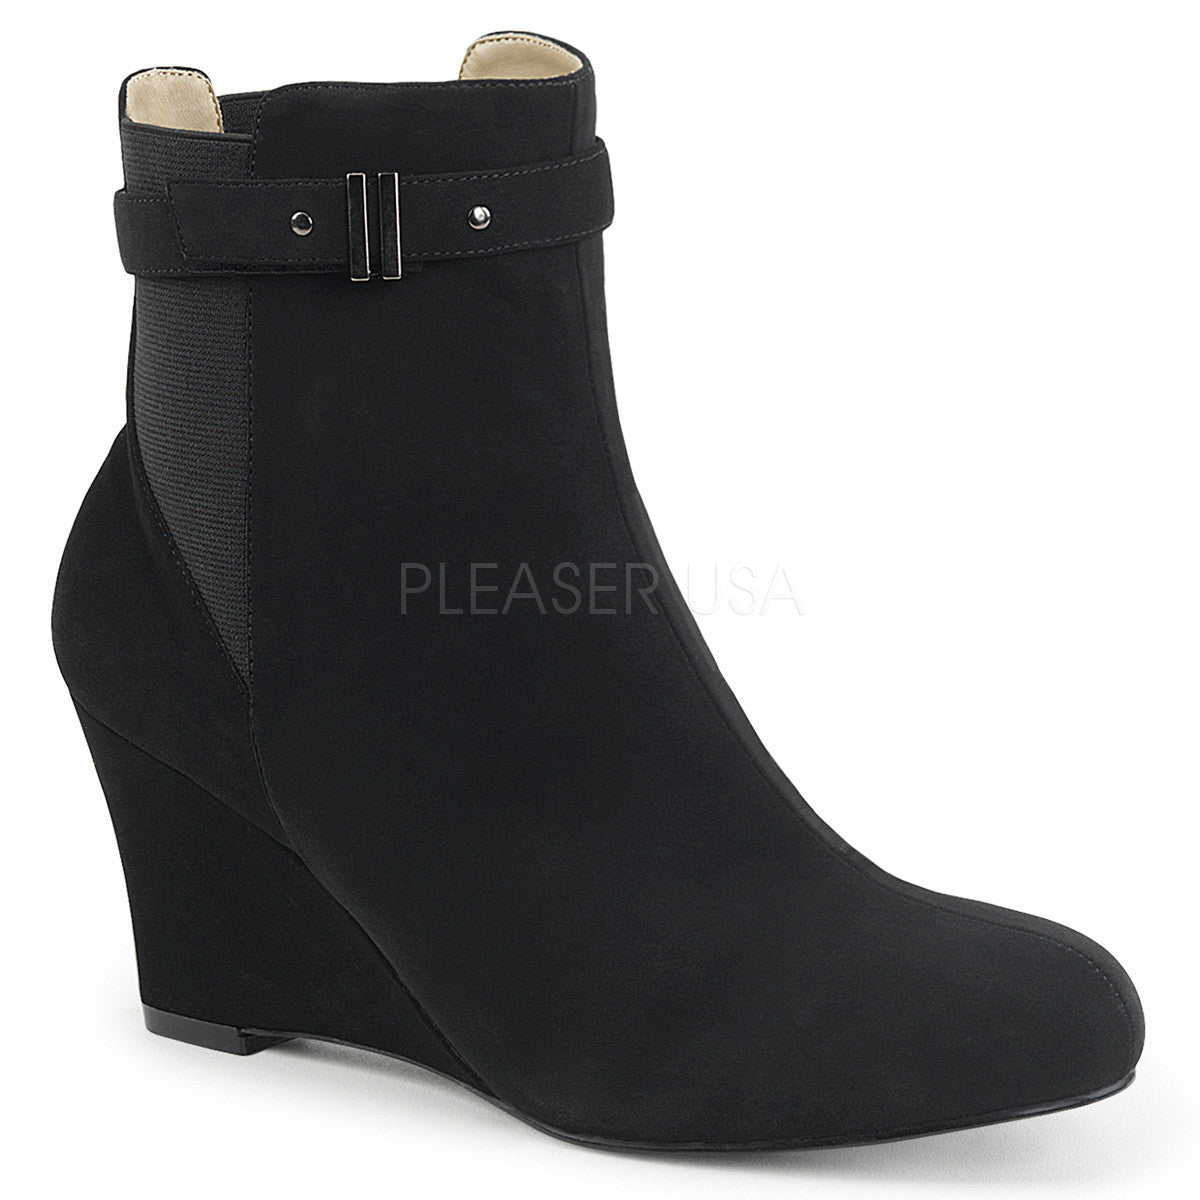 Pleaser Pink Label KIMBERLY-102 Black Nubuck Suede Ankle Boots - Shoecup.com